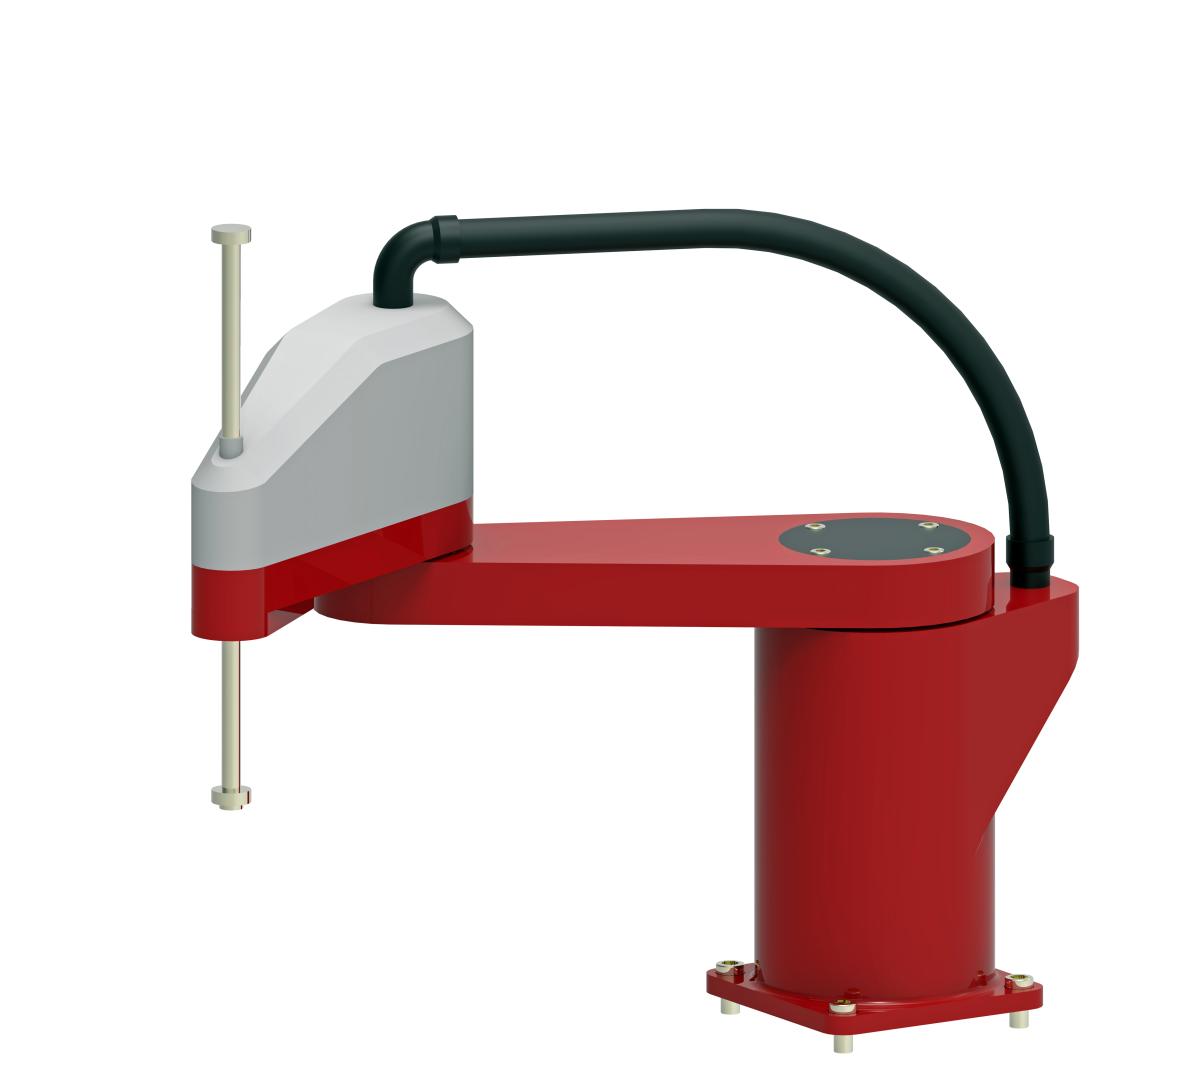 A red and grey SCARA Robotic arm against a white background.